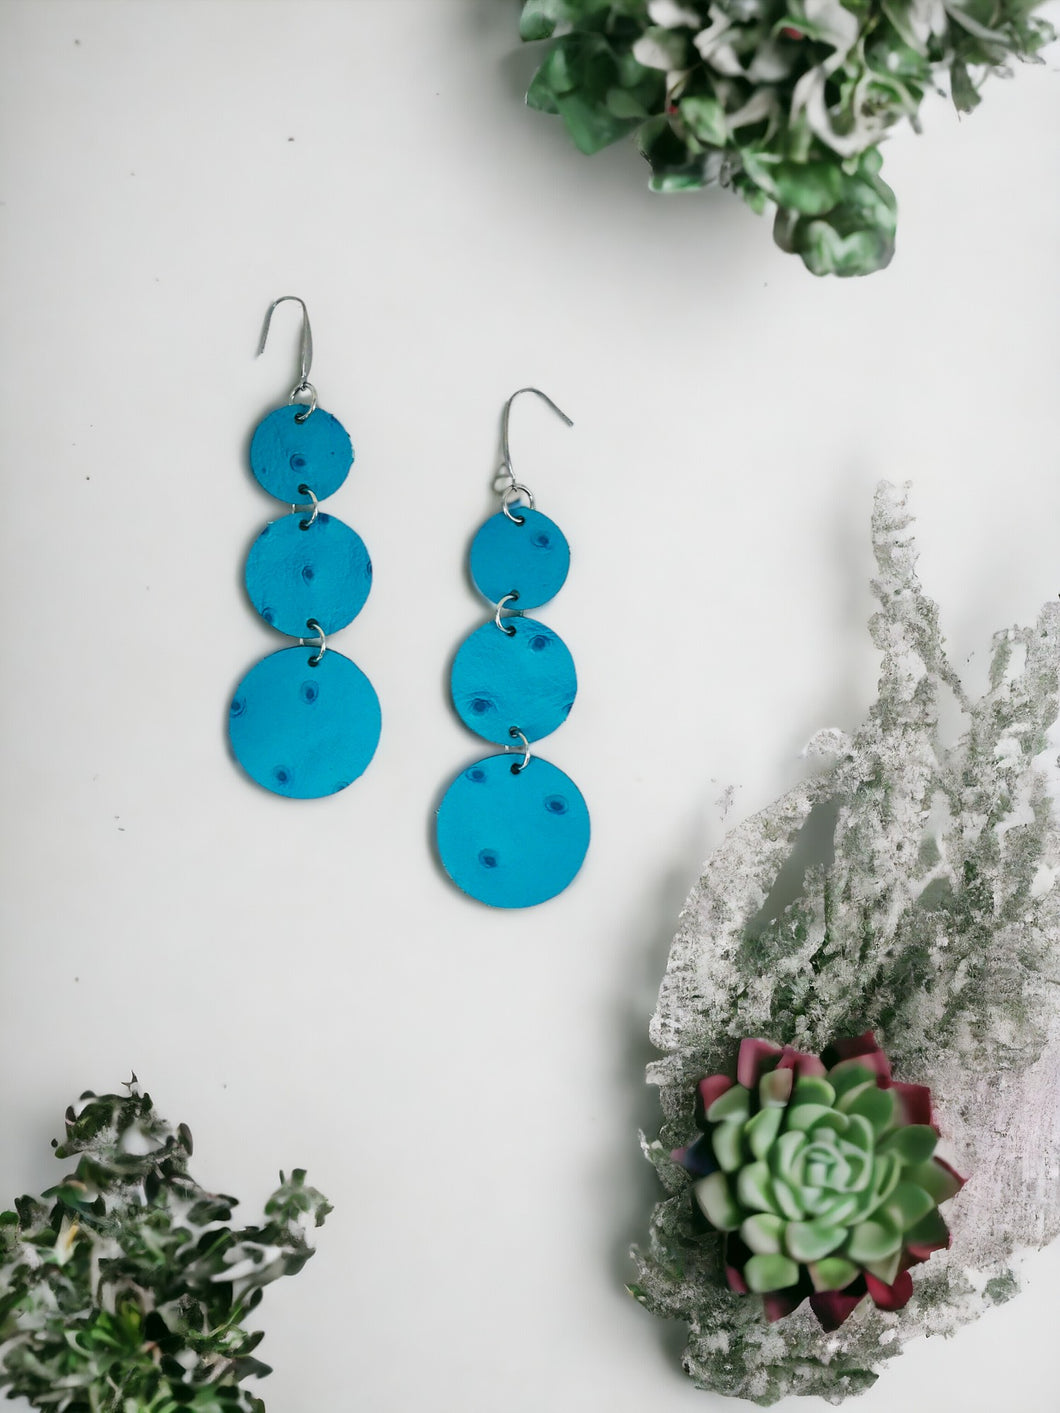 Turquoise Embossed Genuine Leather Earrings - E19-1787